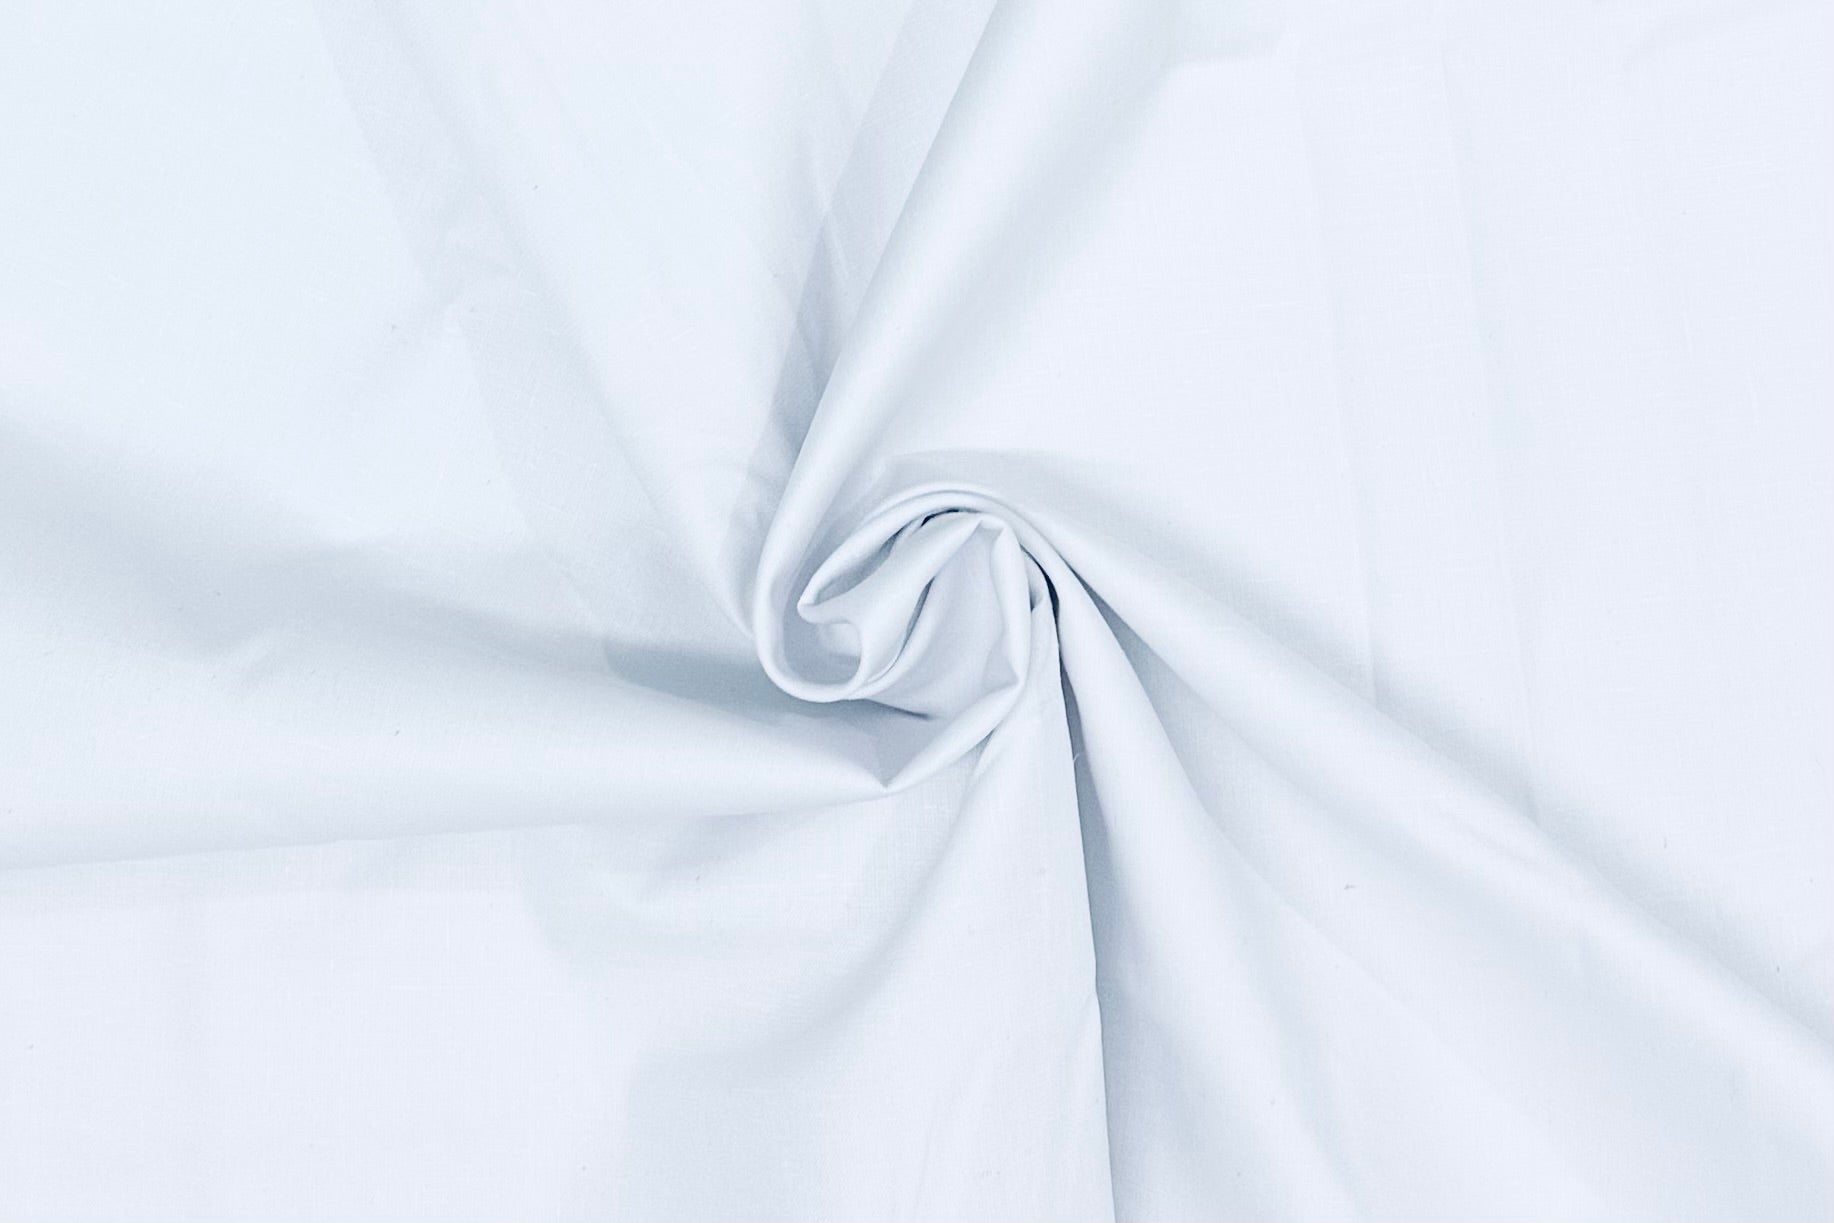 White Plain Heavy Quality Cotton Linen Shirt Fabric (Length-2.25 Meter | Width-34 Inch) Starting at - Just Rs. 749! with Free Shipping & COD Options